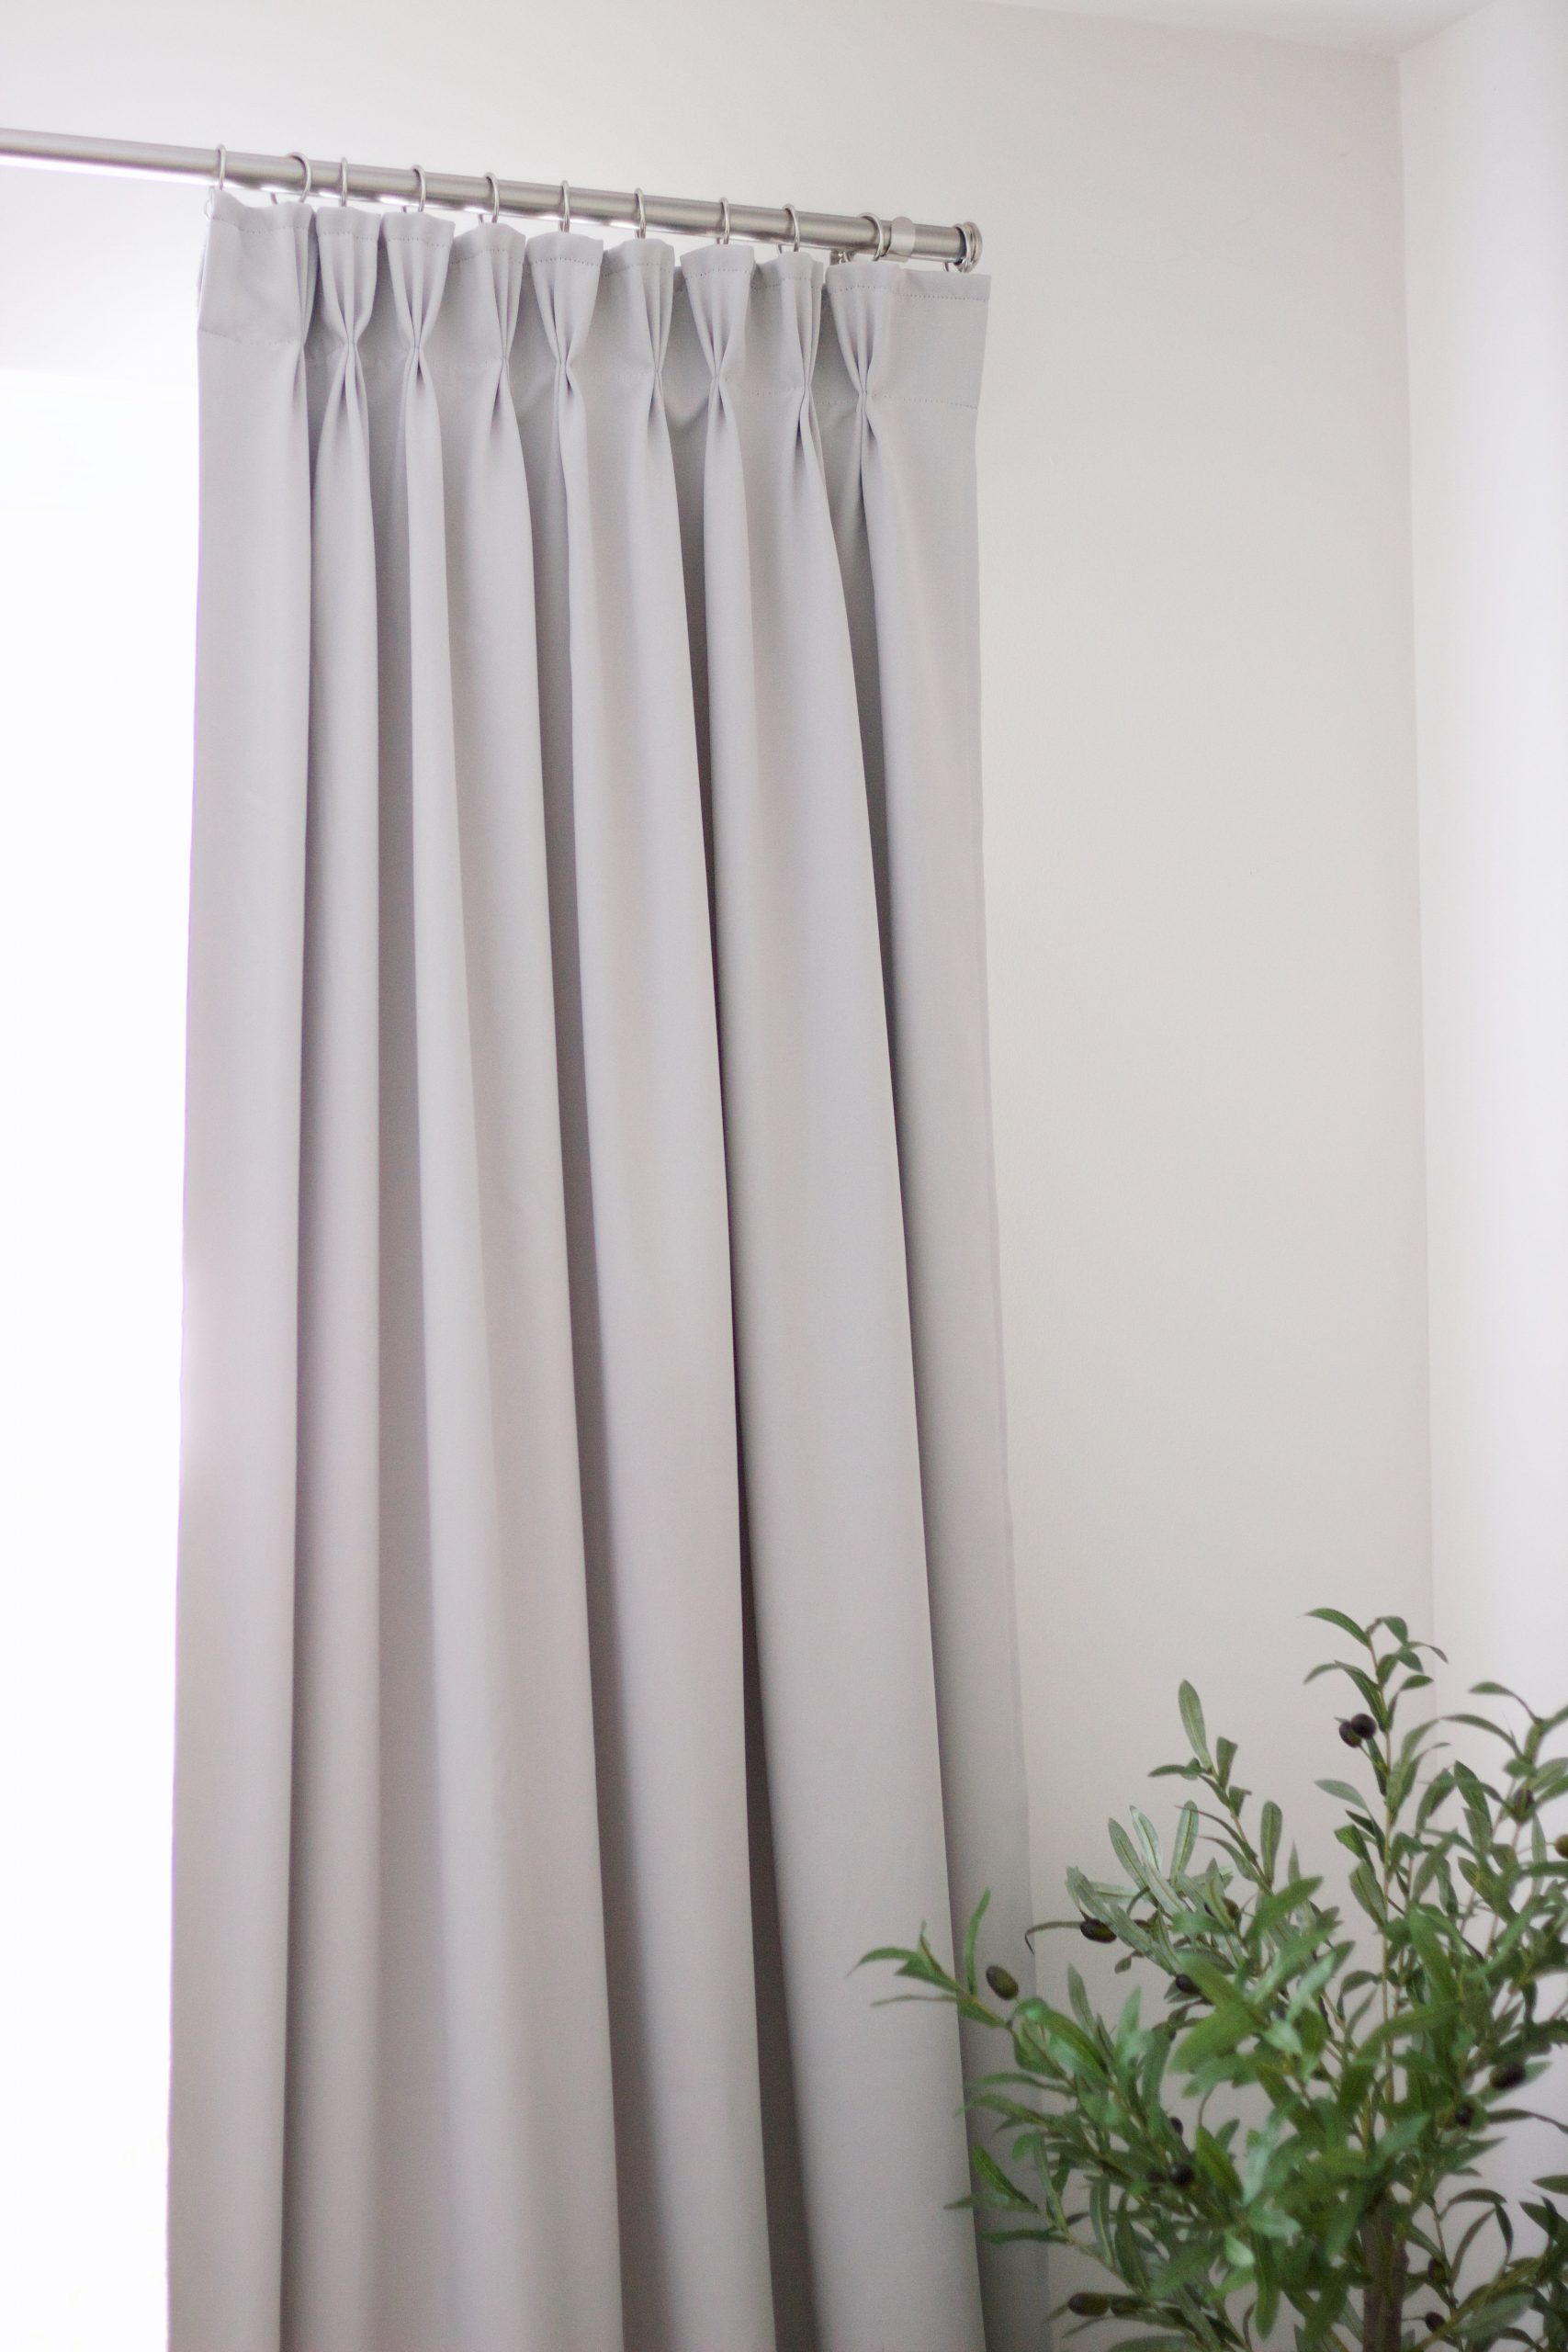 How to Hang Pinch Pleat Curtains